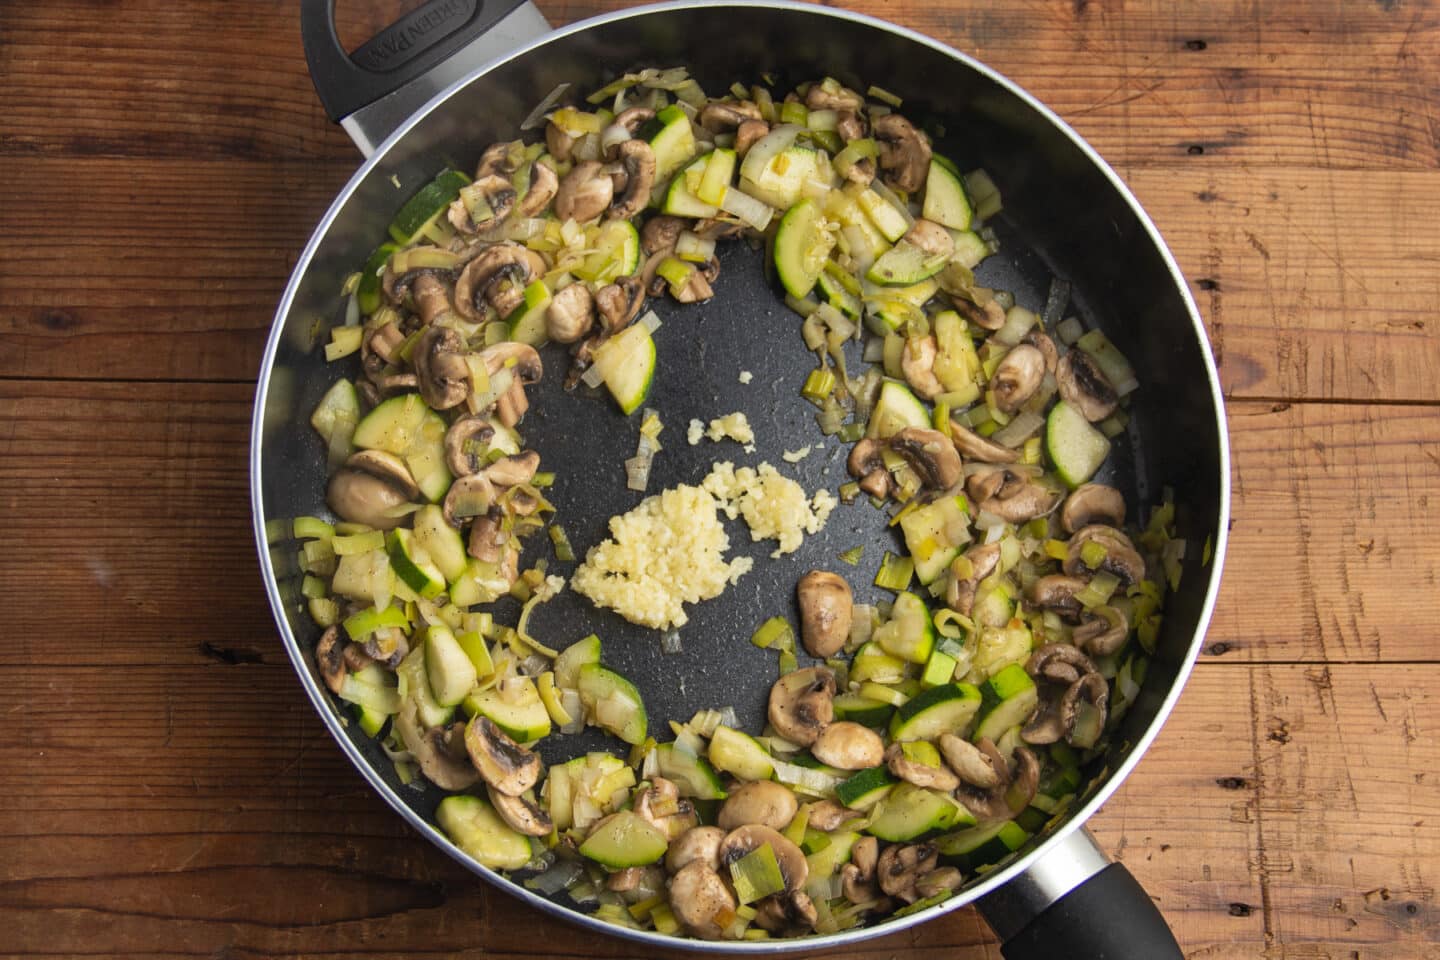 This is a picture of the skillet full of veggies with added garlic.